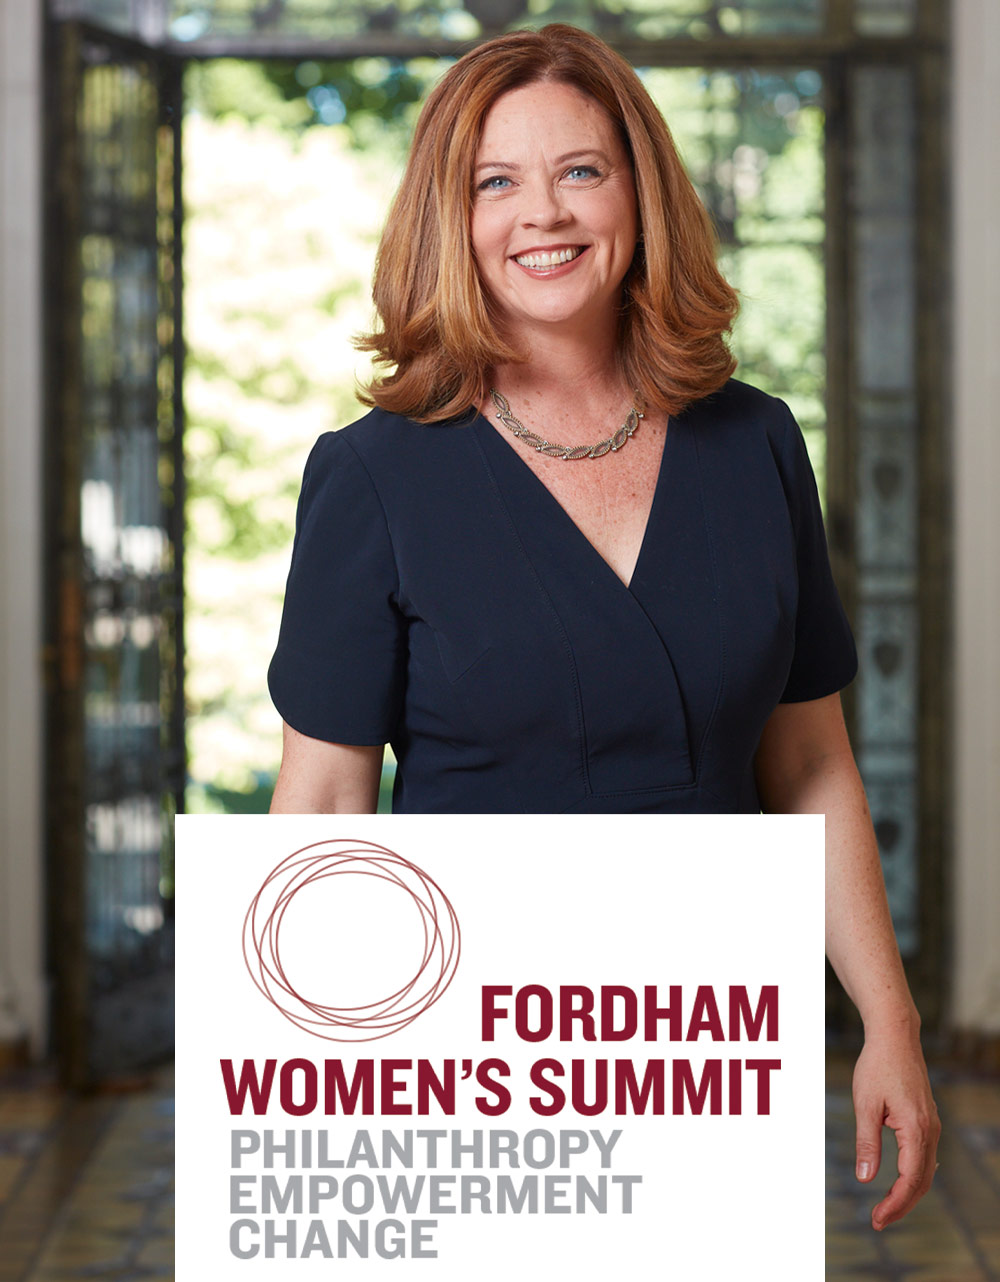 portrait of Tania Tetlow, standing in a hallway, wearing a dress and smiling; Fordham Women's Summit: Philanthropy, Empowerment, Change